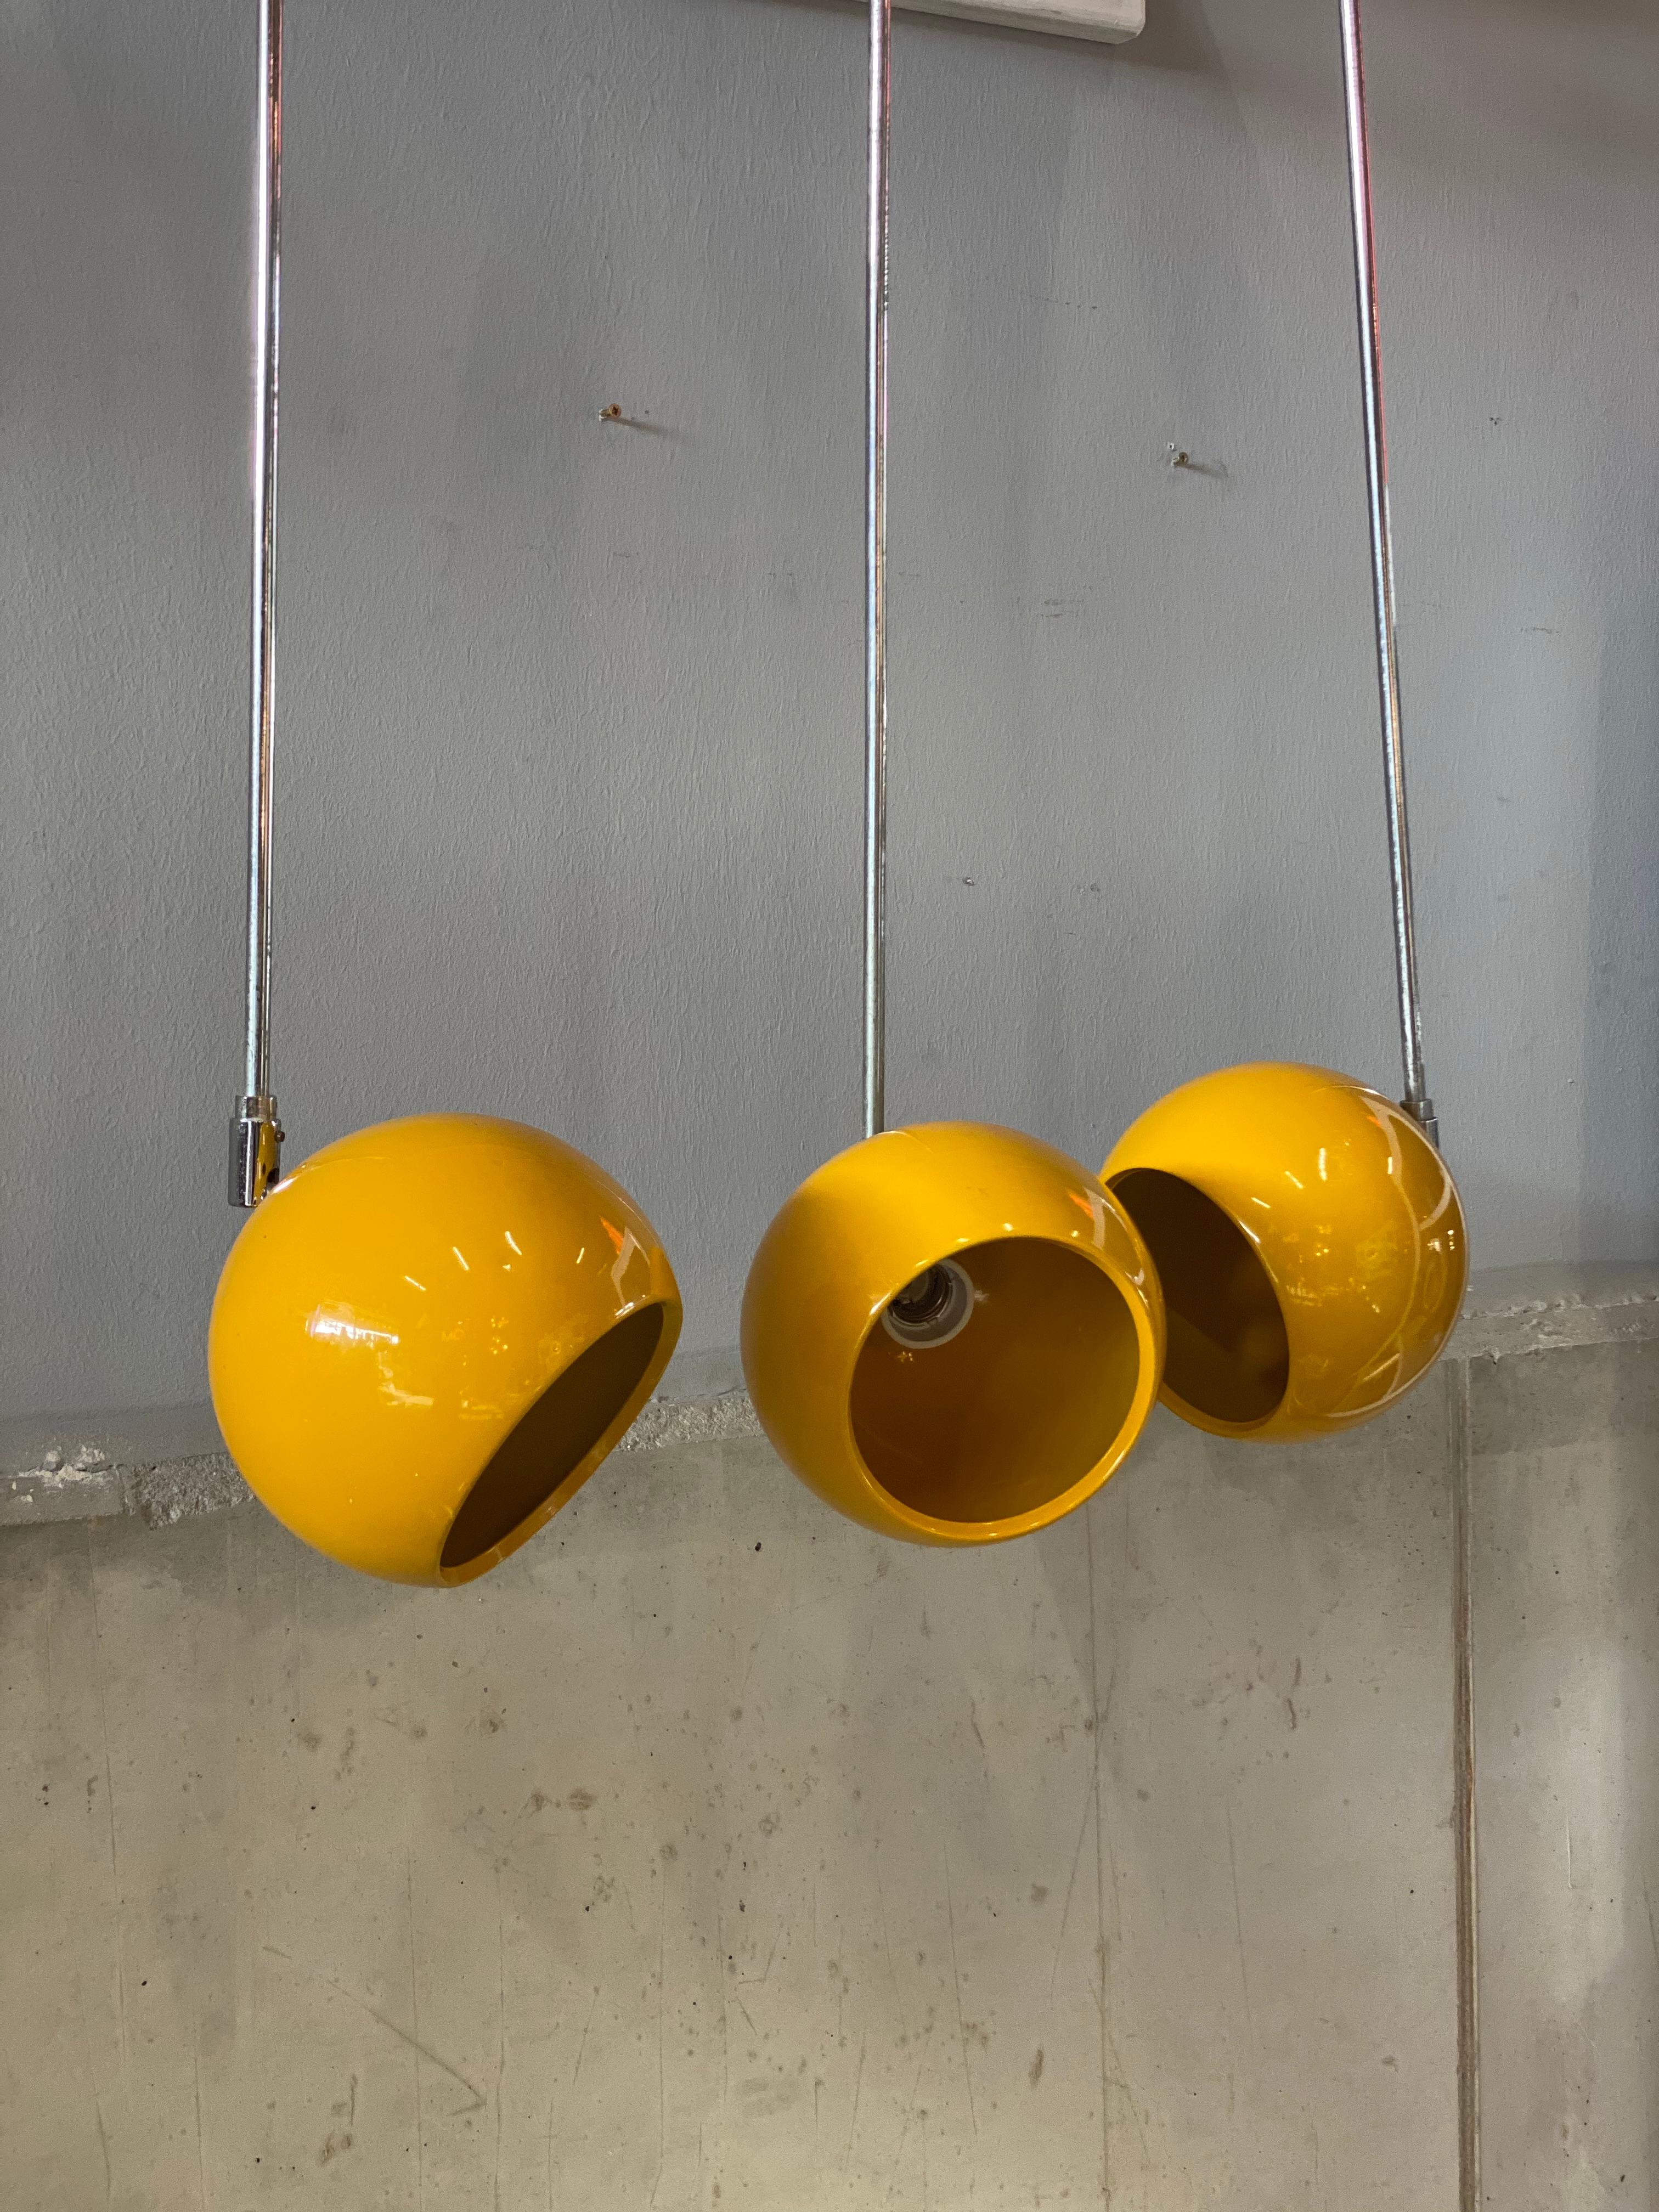 Late 20th Century Set of Yellow Pendant Lamps / Spots, Space Age, 1970s Design, Panton Style